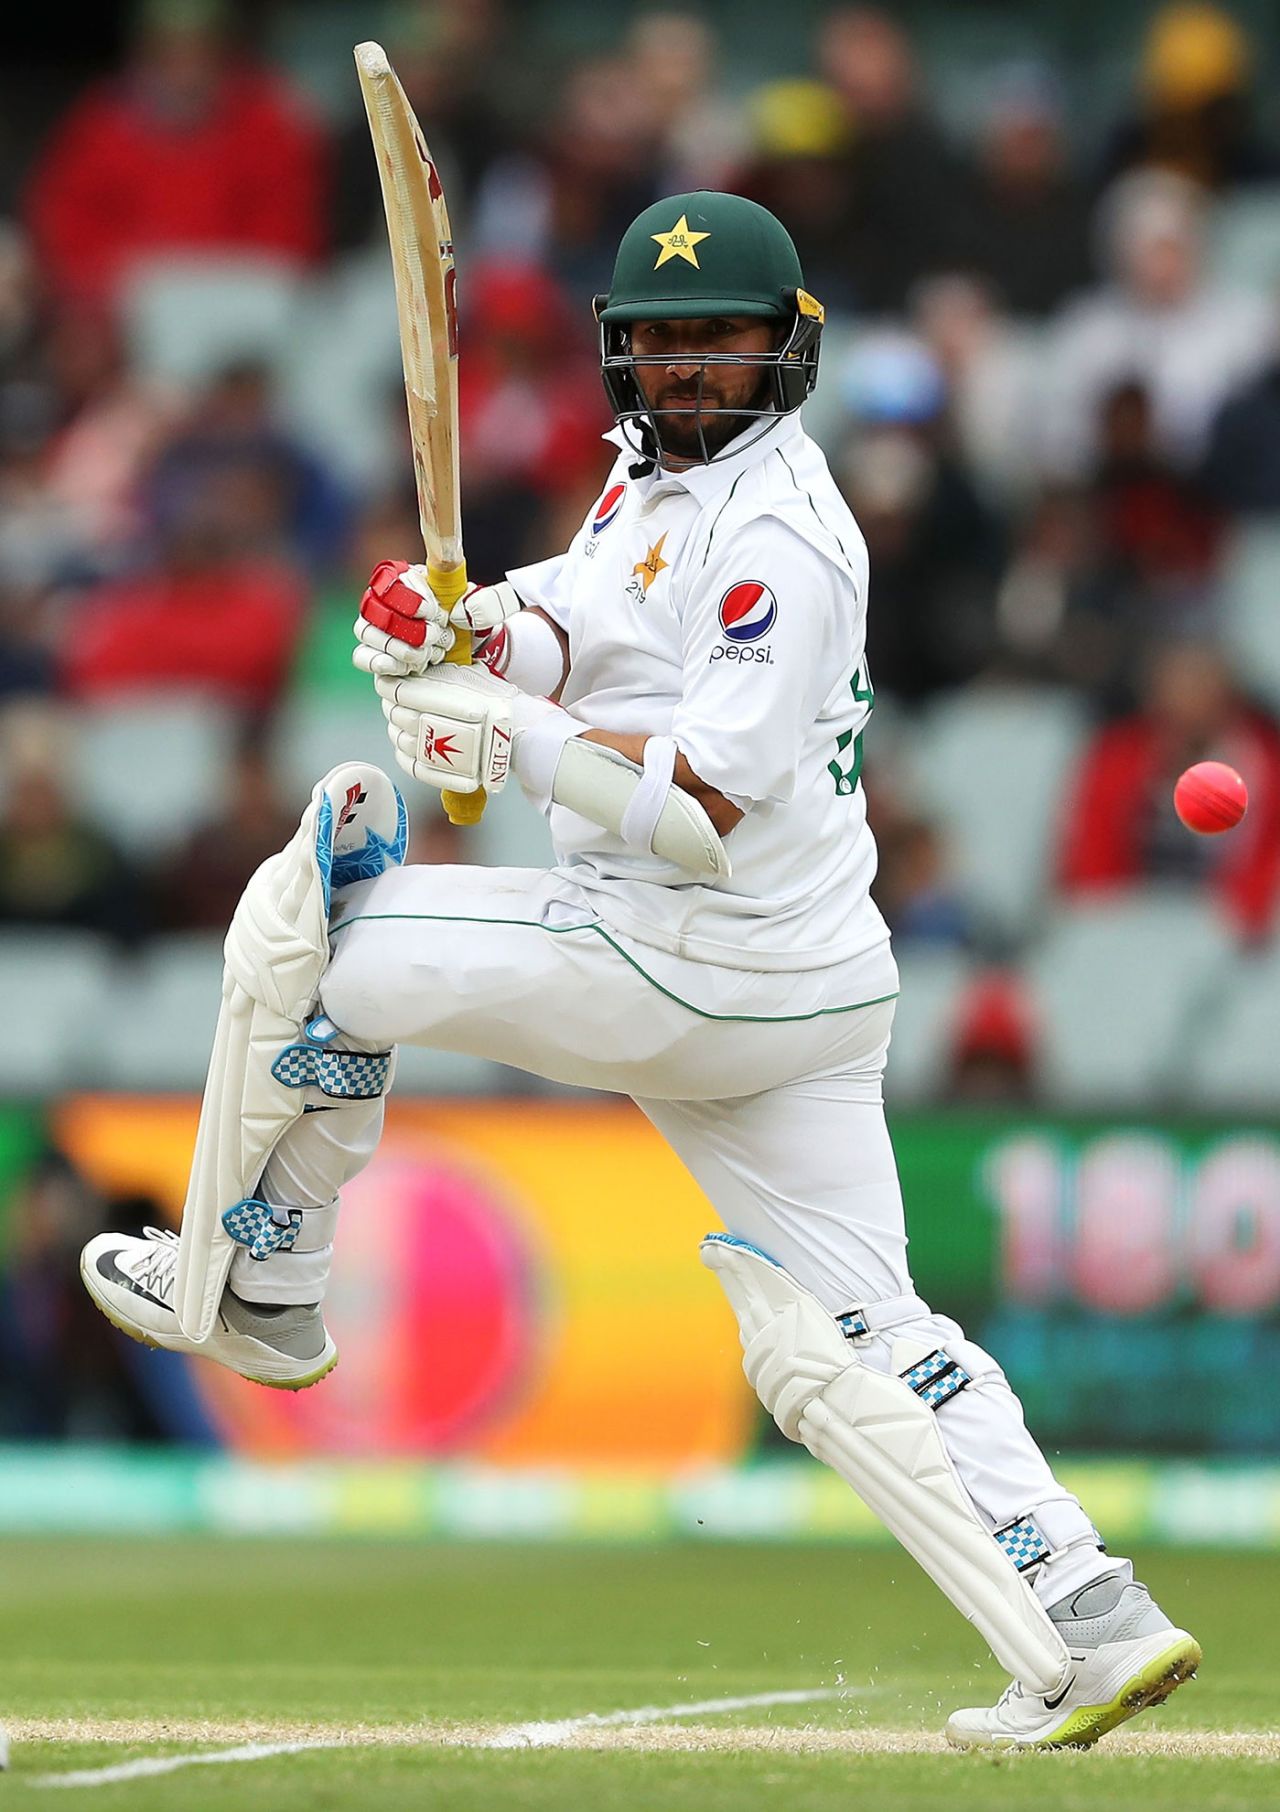 Yasir Shah whips one off his hip, Australia v Pakistan, 2nd Test, Adelaide, day 3, December 1, 2019